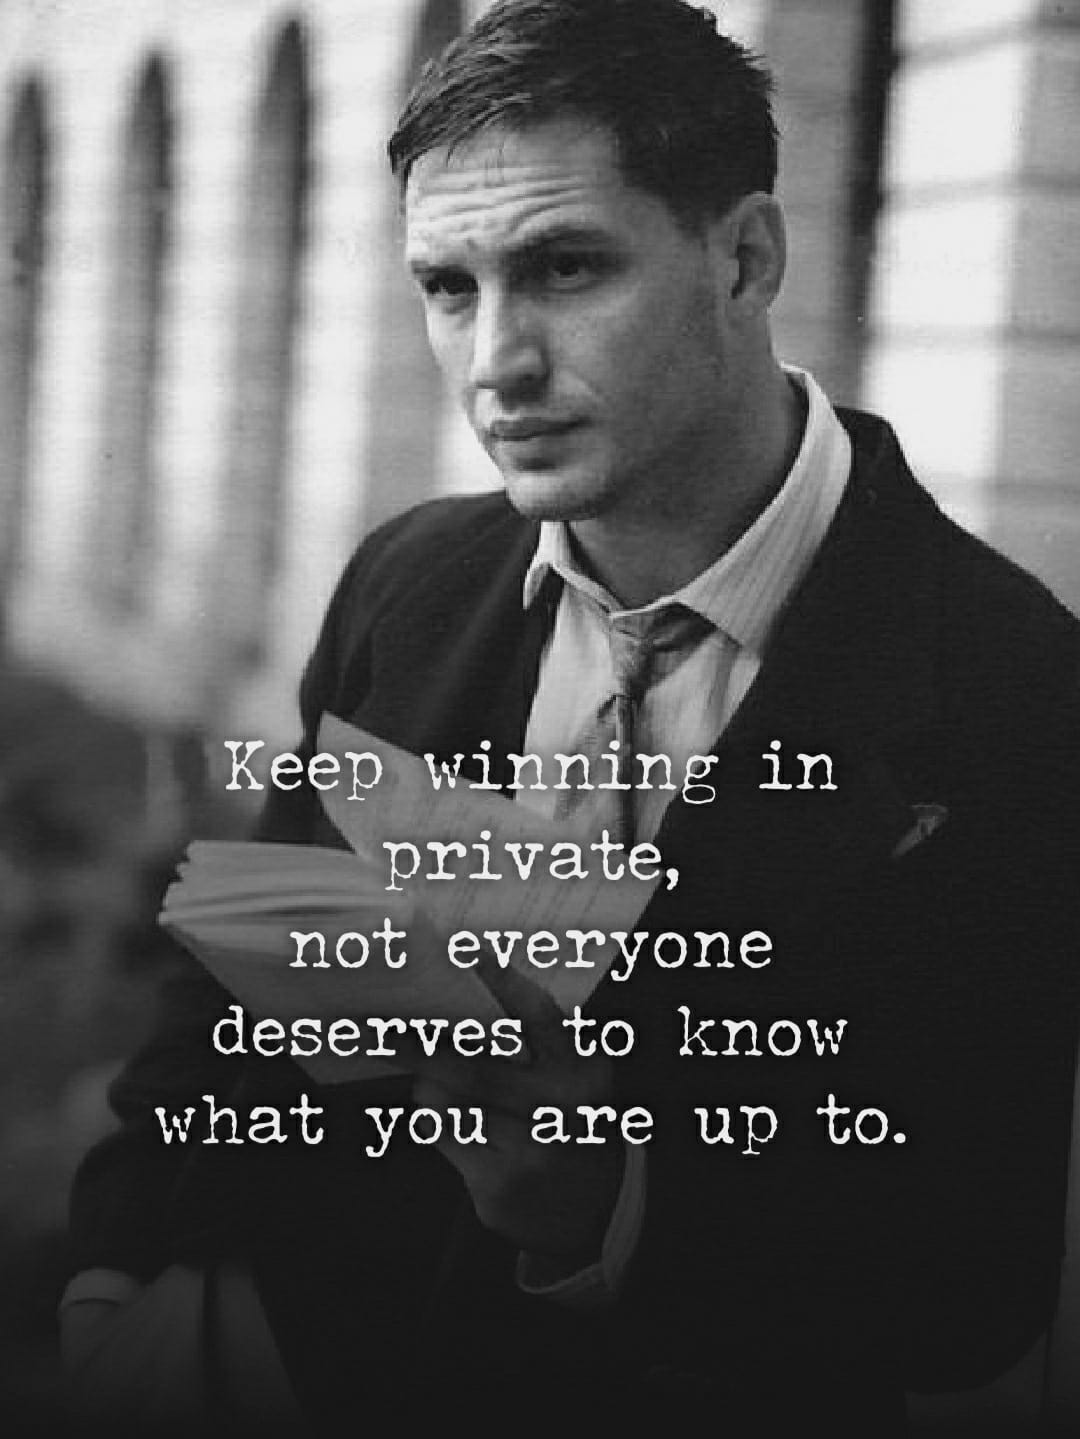 keep winning in private, not everyone needs to know what you’re up to.